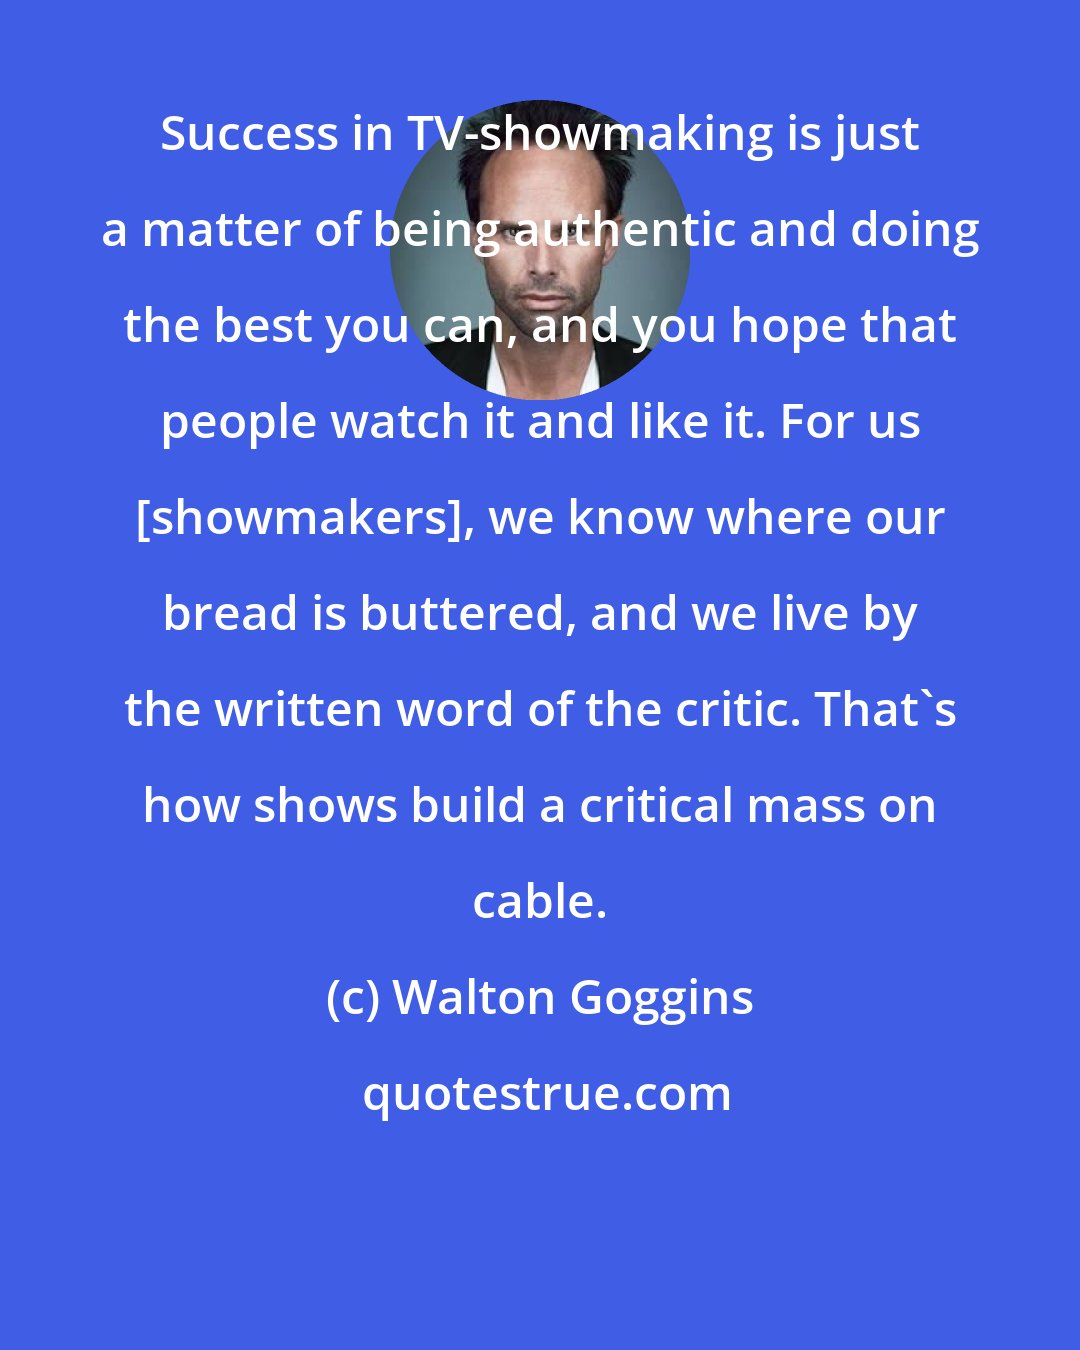 Walton Goggins: Success in TV-showmaking is just a matter of being authentic and doing the best you can, and you hope that people watch it and like it. For us [showmakers], we know where our bread is buttered, and we live by the written word of the critic. That's how shows build a critical mass on cable.